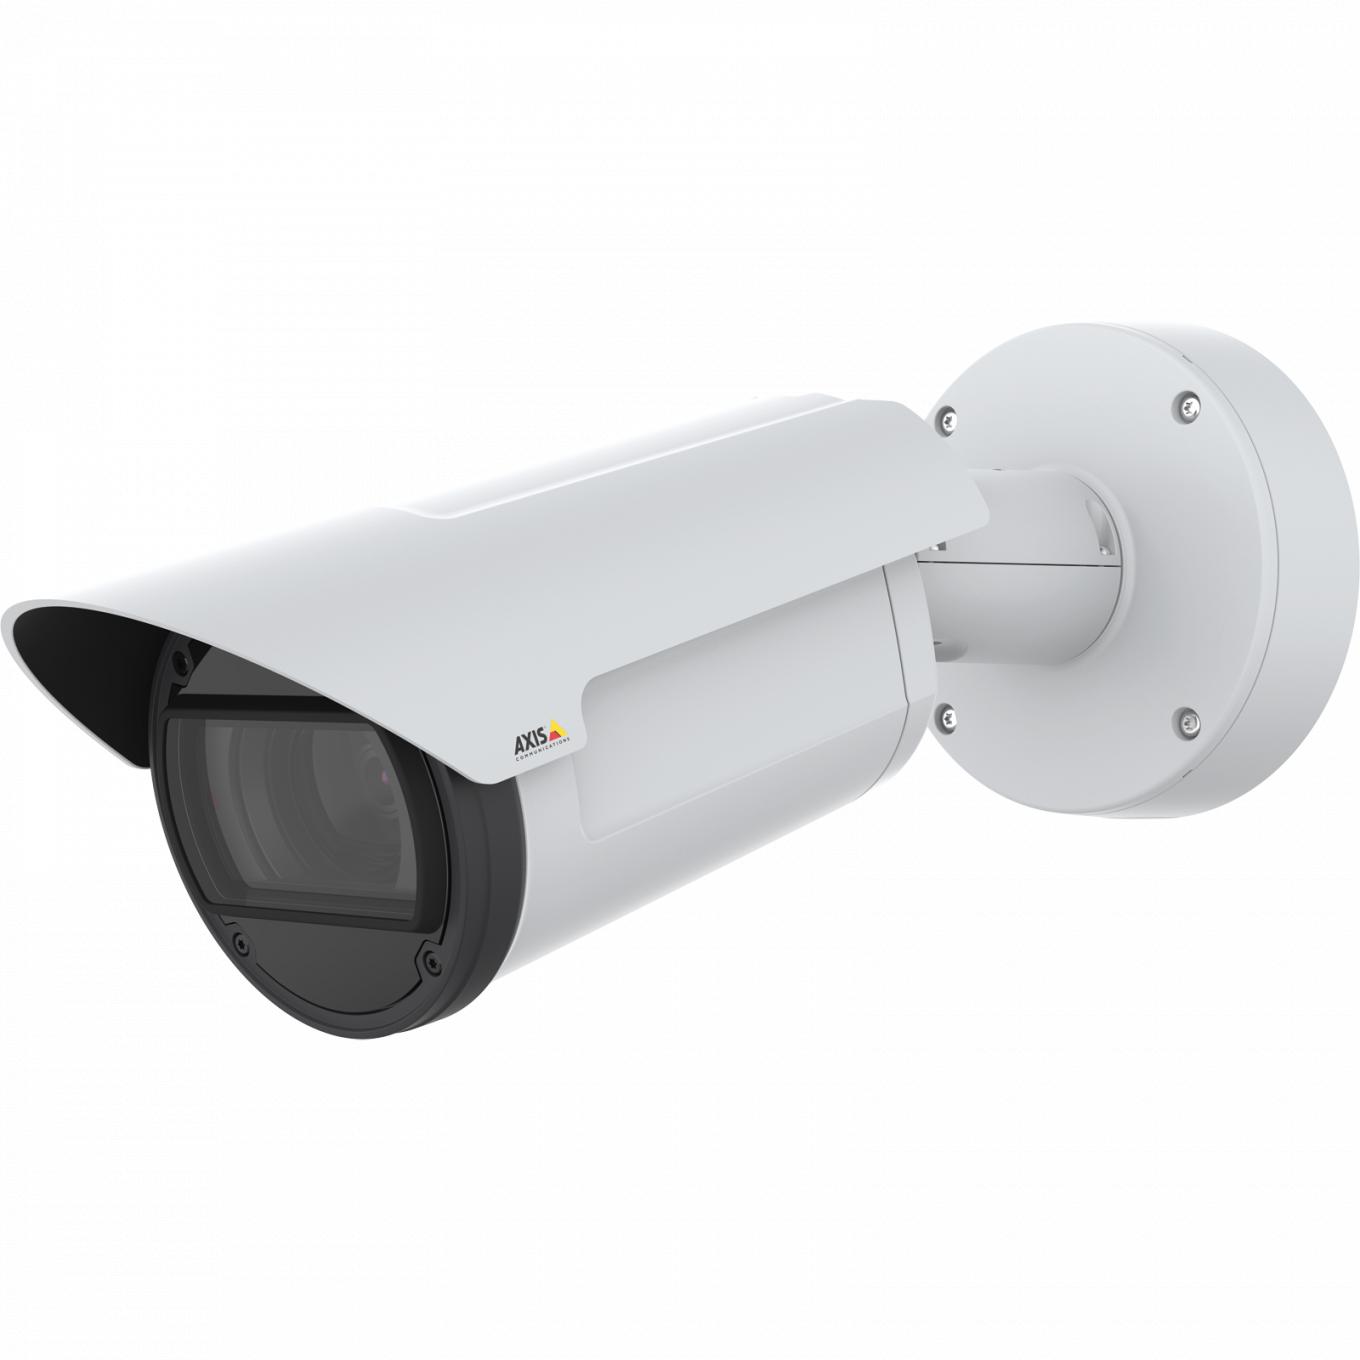 AXIS Q1786-LE IP Camera has OptimizedIR. The product is viewed from its left angle.